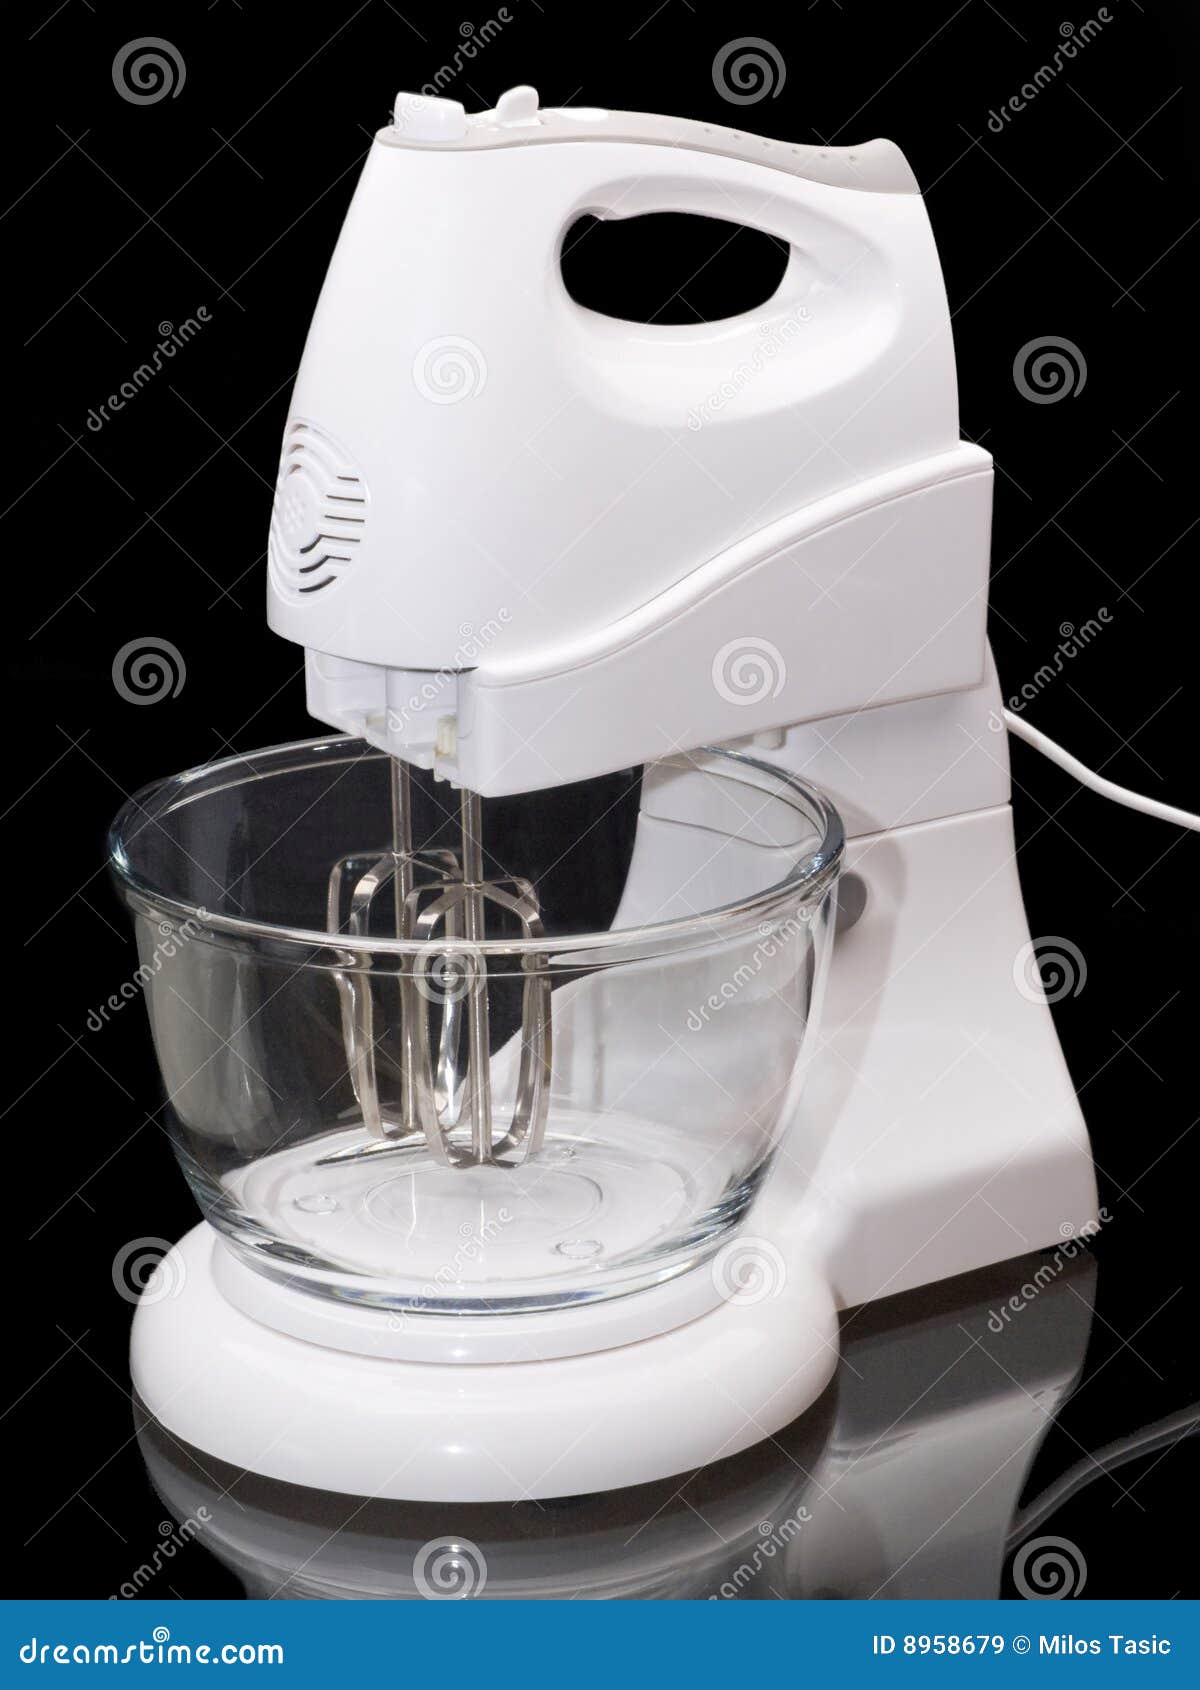 https://thumbs.dreamstime.com/z/electric-stand-mixer-8958679.jpg